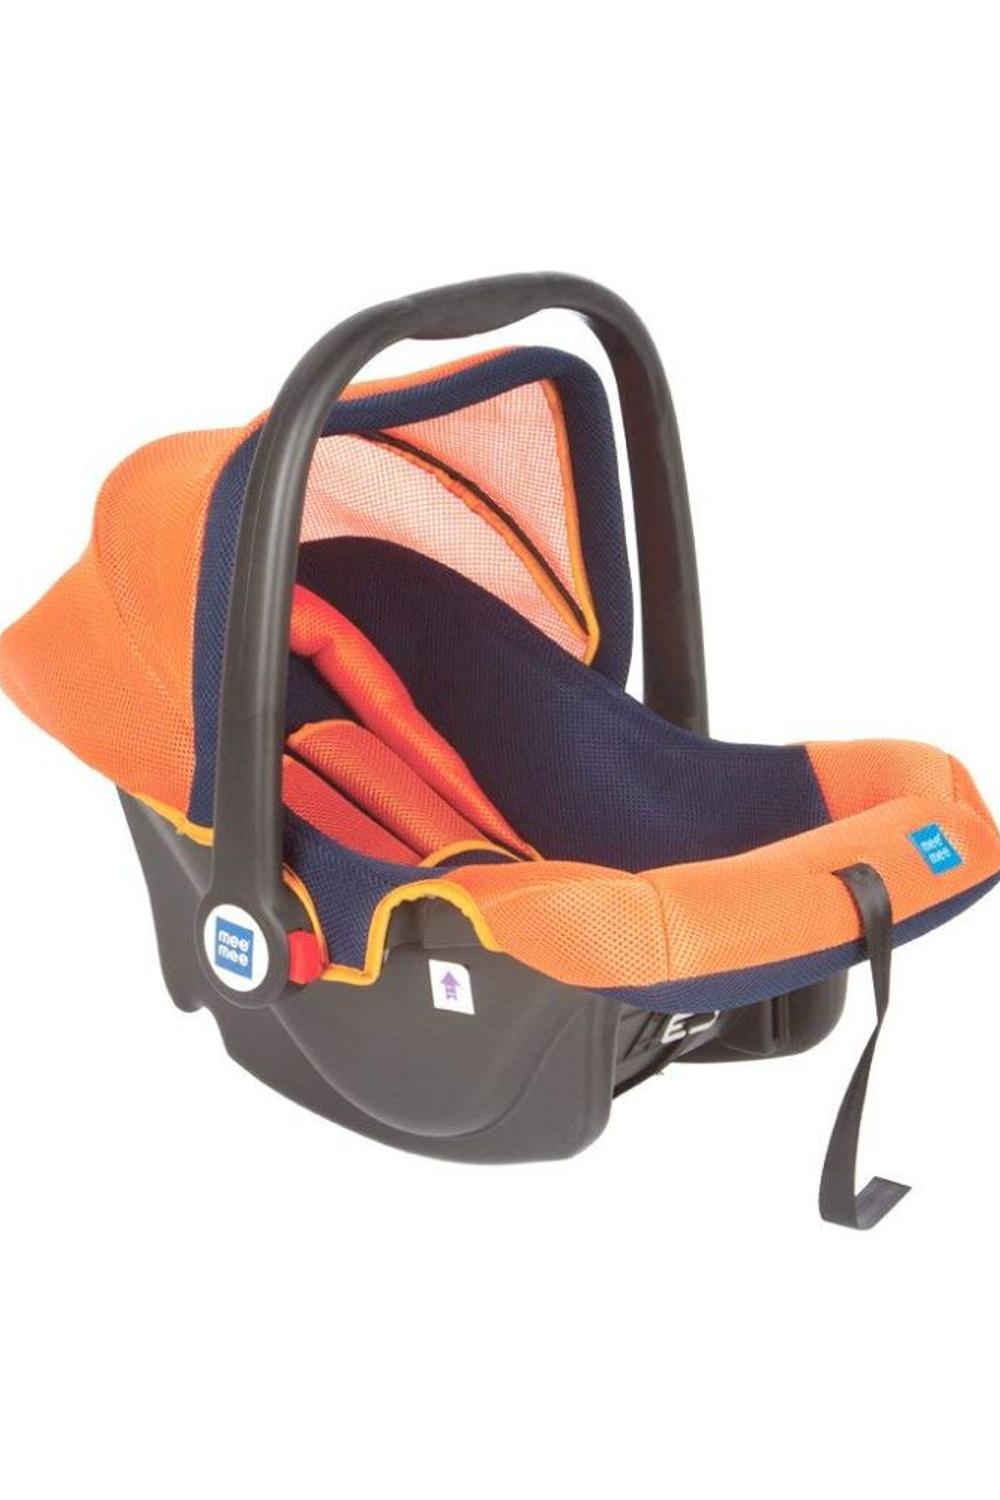 Mee Mee Baby Car Seat cum Carry Cot with Thick Cus